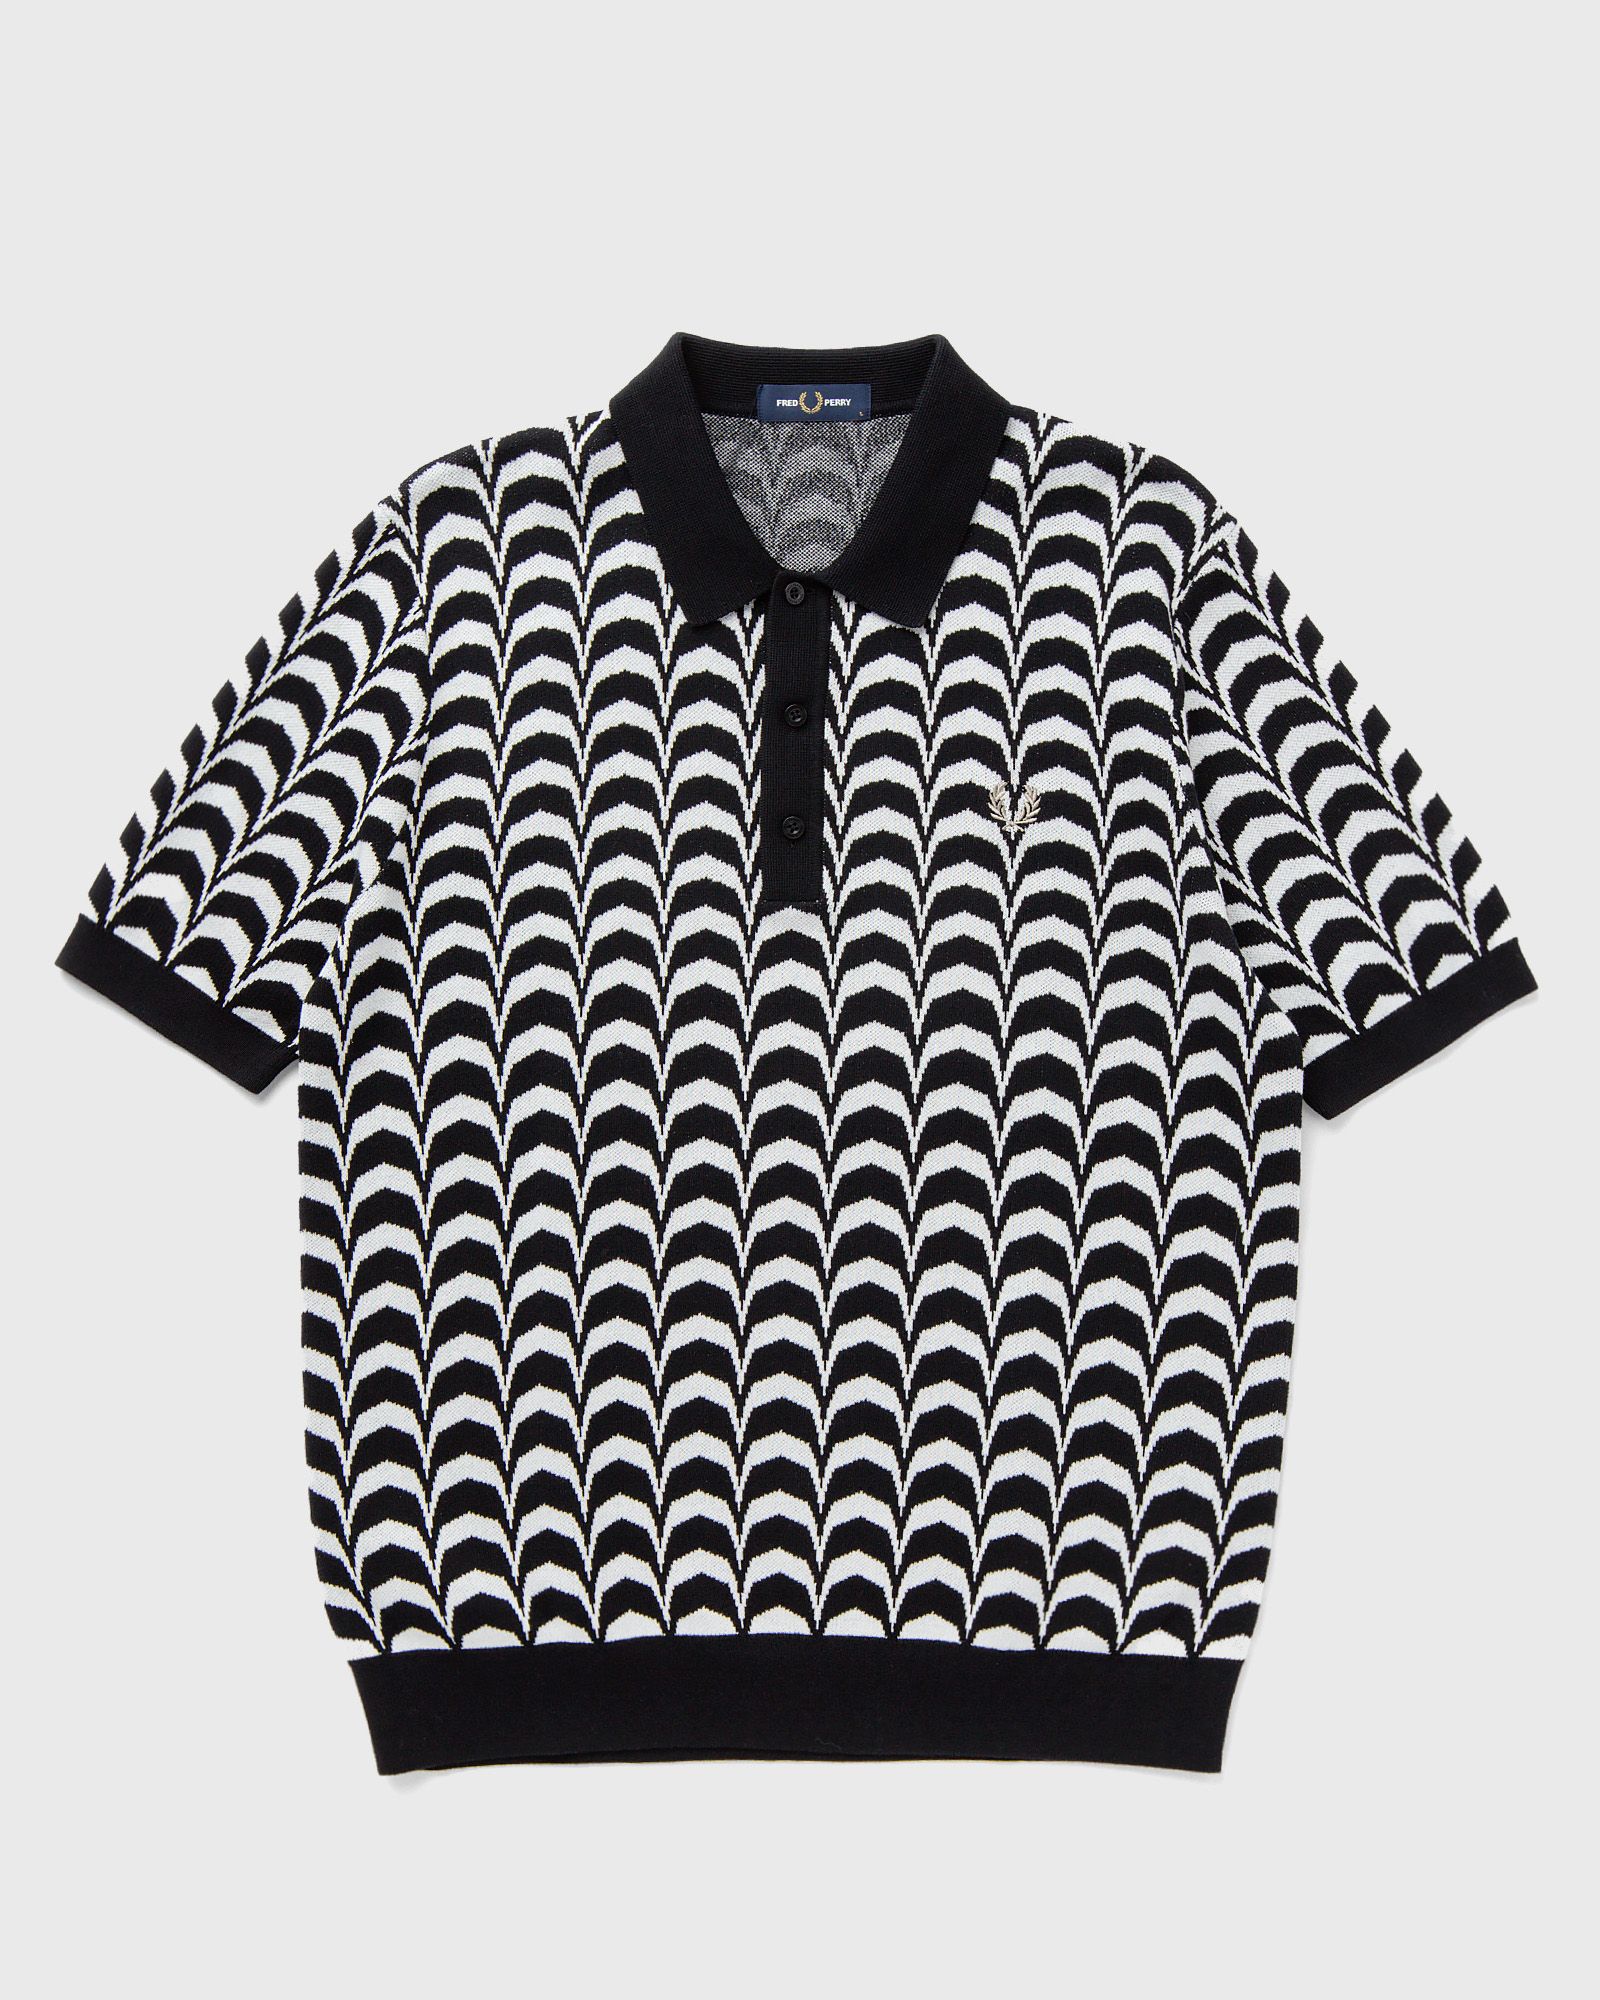 Fred Perry - jacquard knitted shirt men polos black|white in größe:l